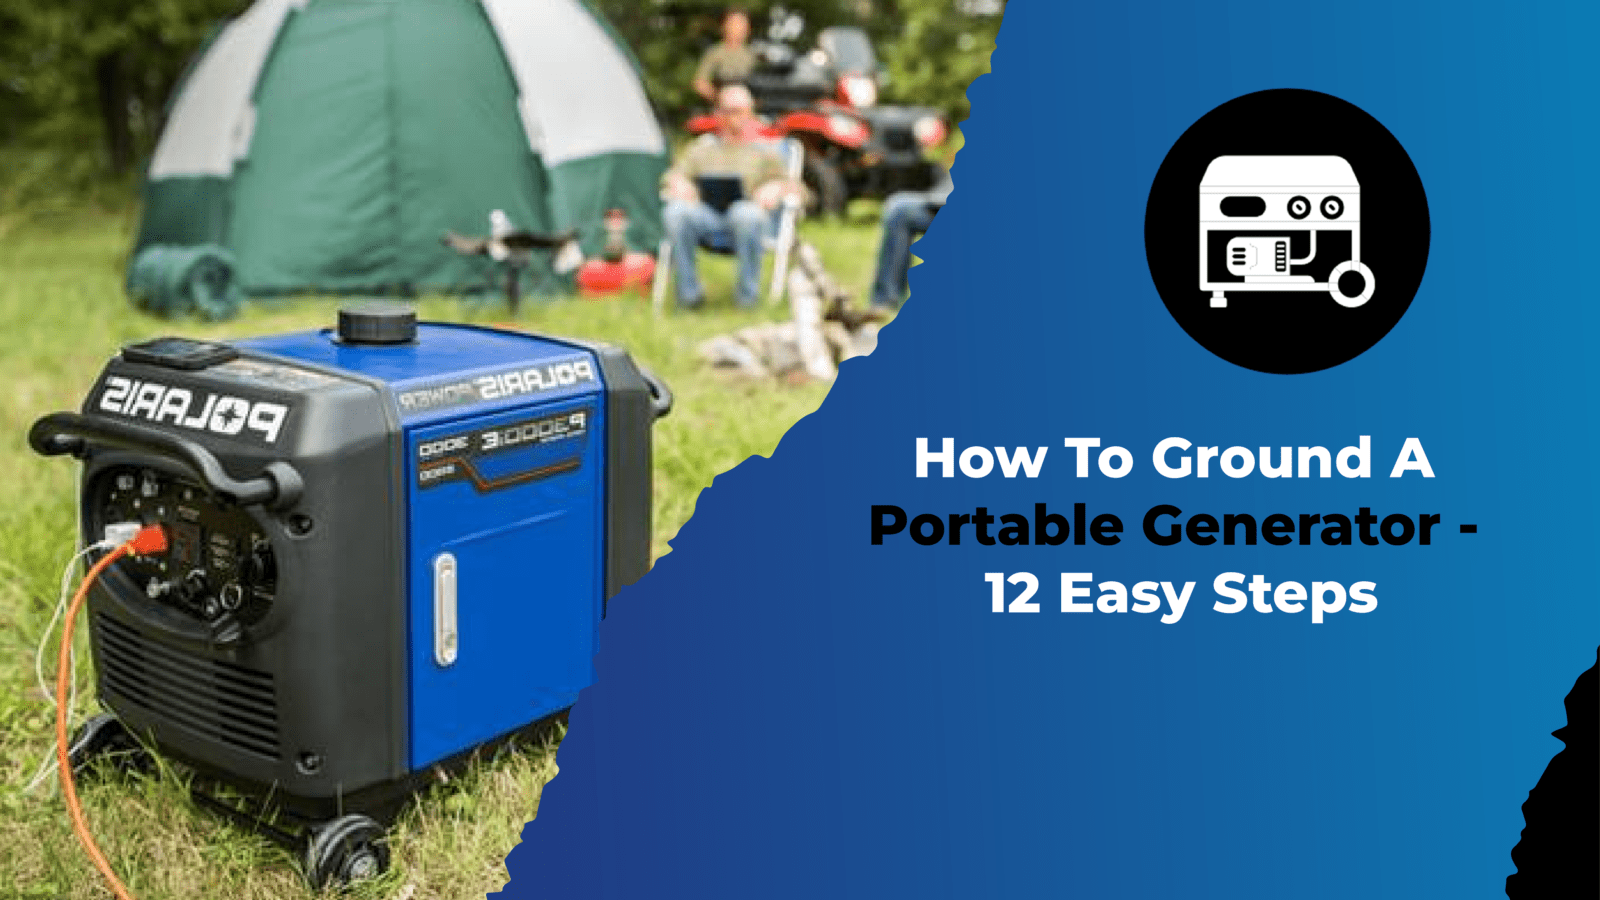 How To Ground A Portable Generator - 12 Easy Steps